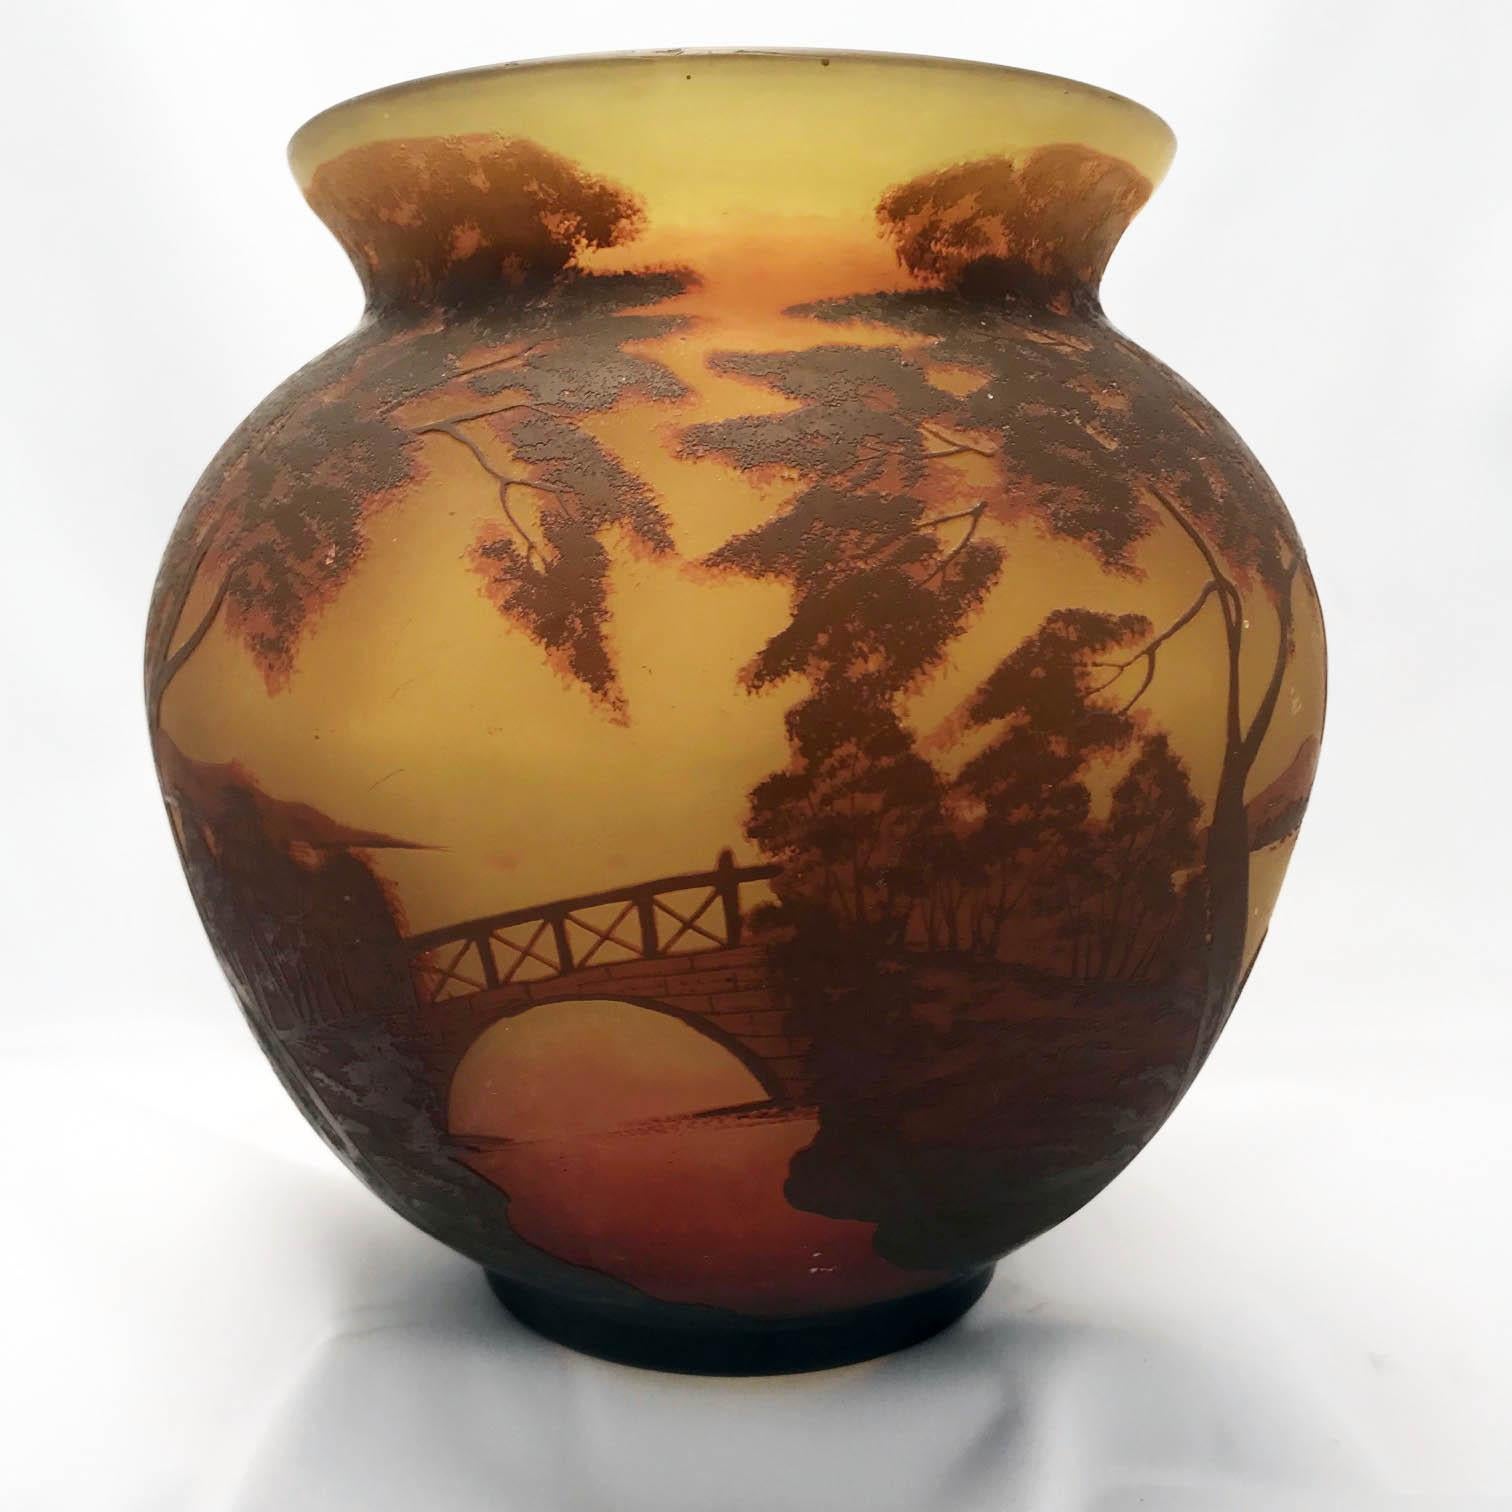 This vase by Arsall is very evocative of the Art Nouveau period in France and stands up well to comparison with Galle or Daum at a fraction of the cost. It is Cameo etched with an extensive Romantic landscape on a shaded peach and yellow ground.